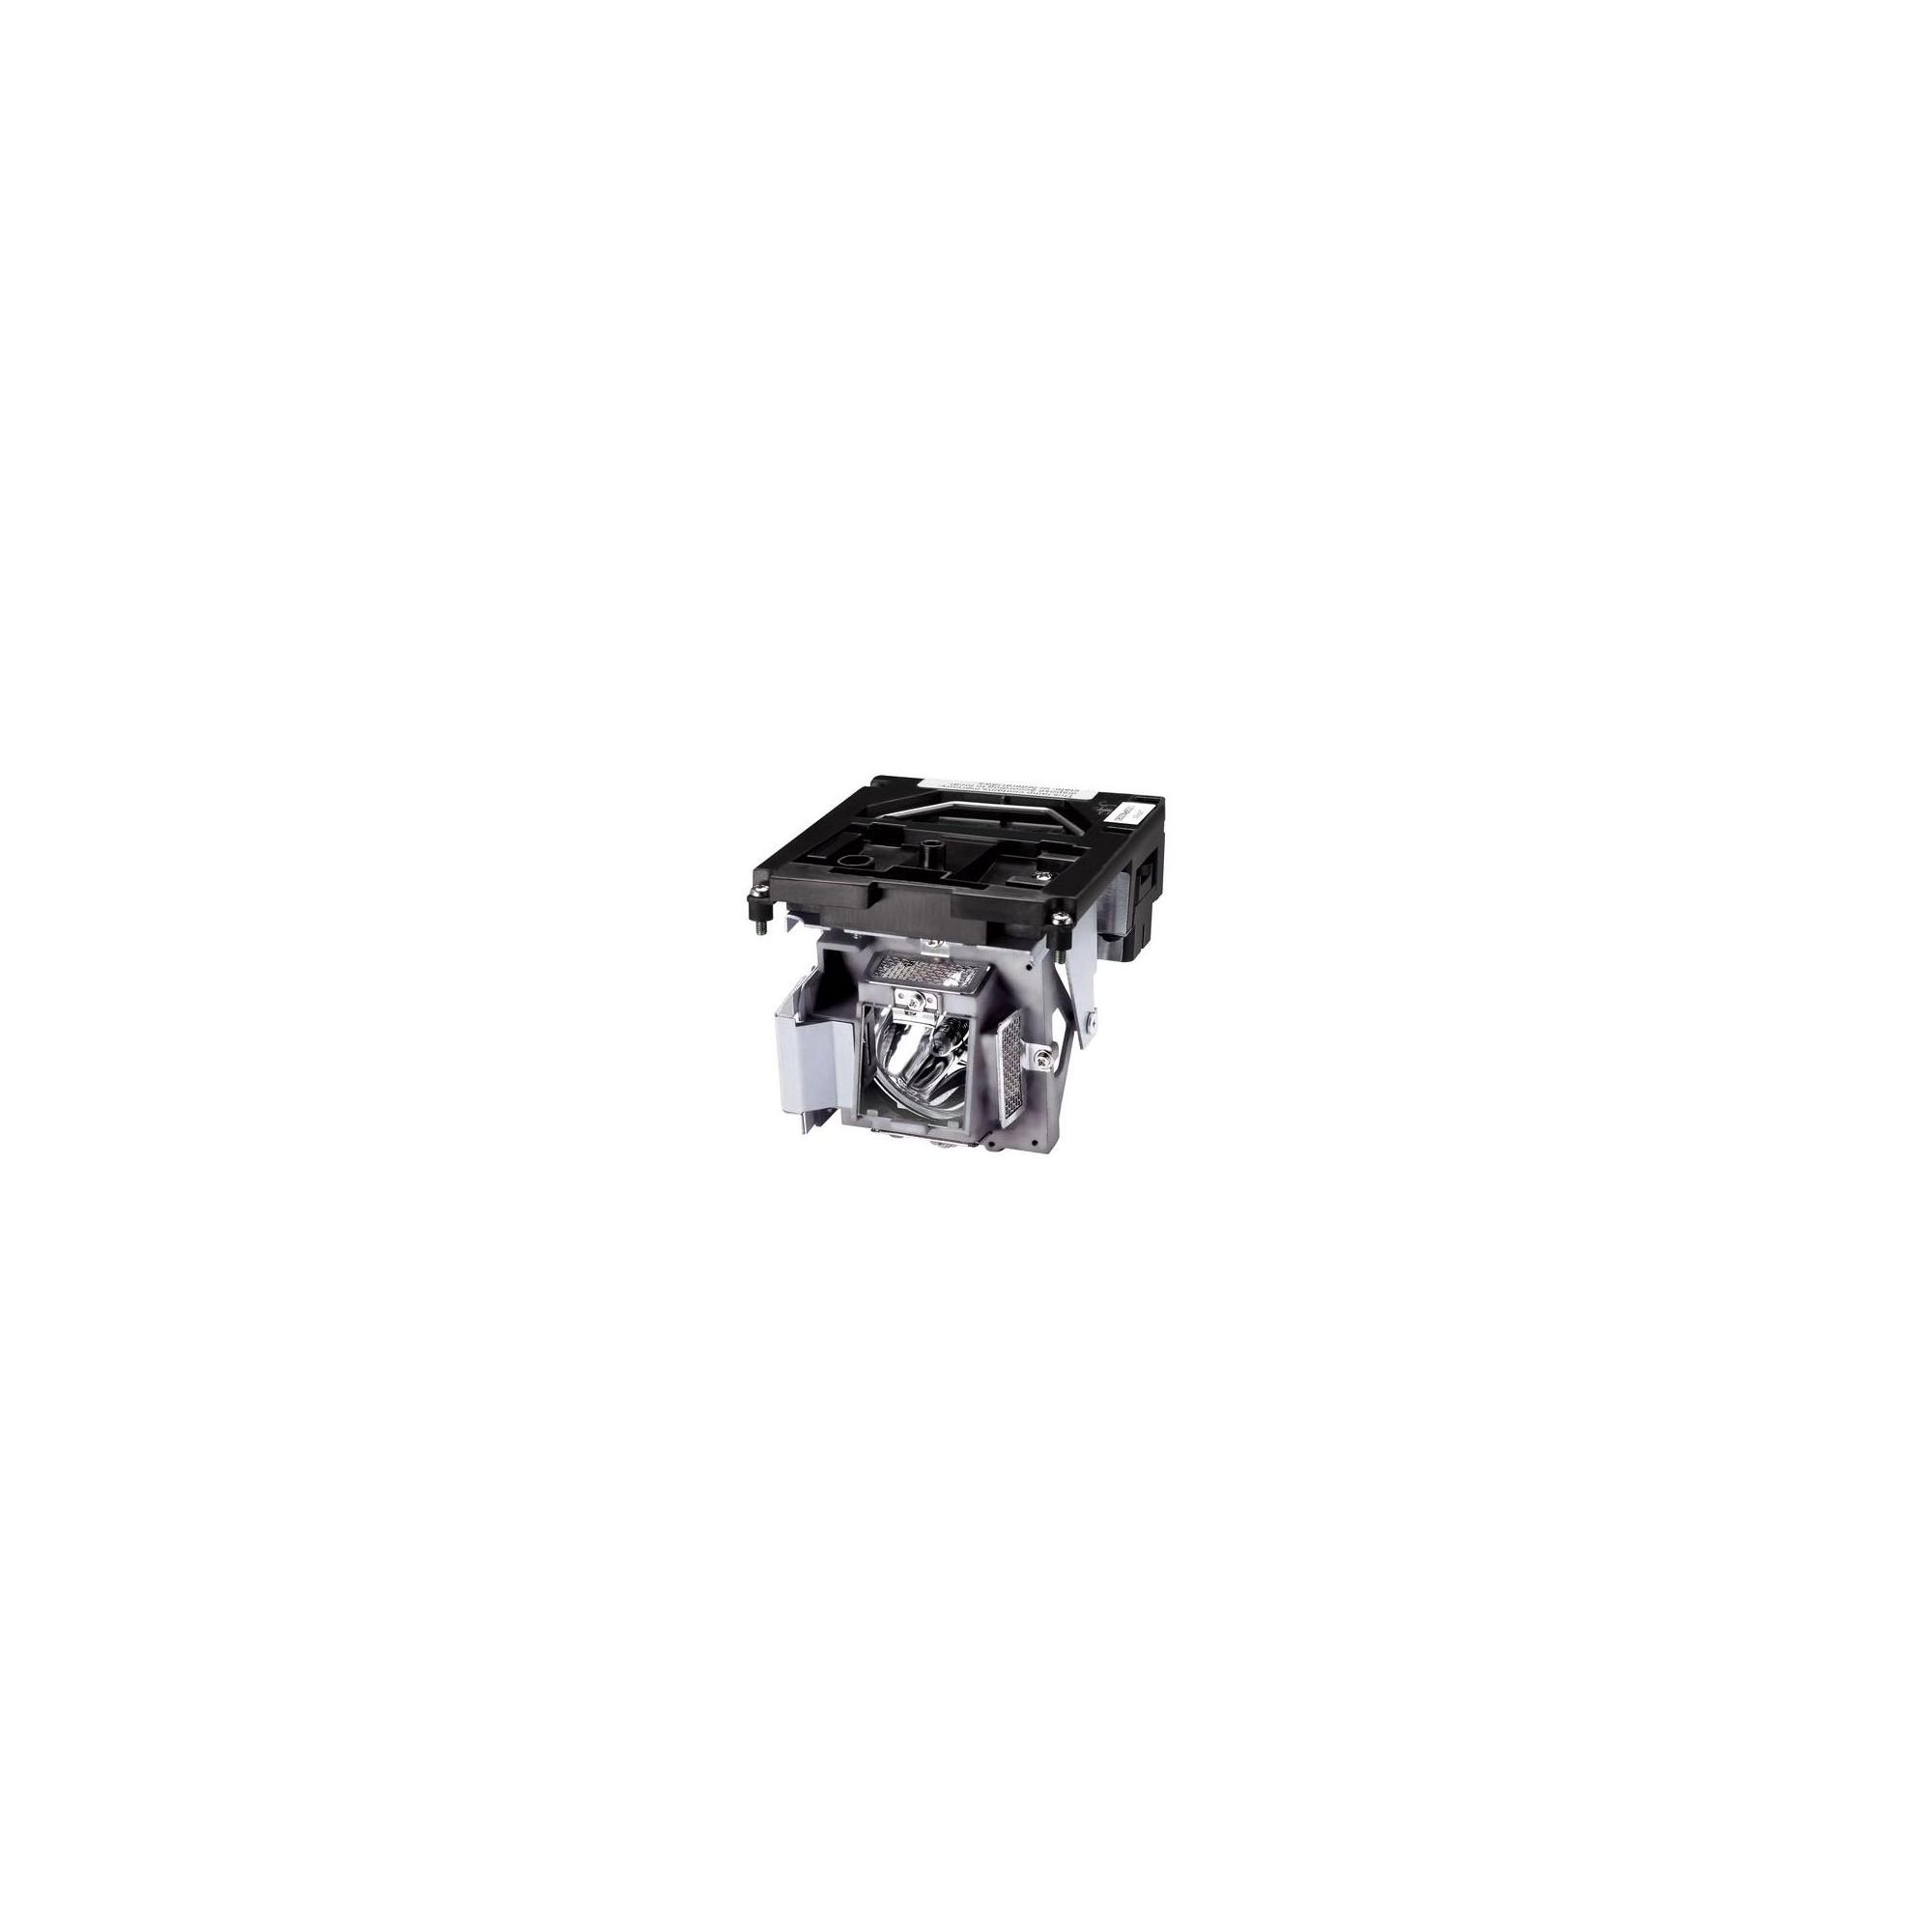 BenQ 280W Replacement Projector Lamp for MP724 Projector at Tescos Direct